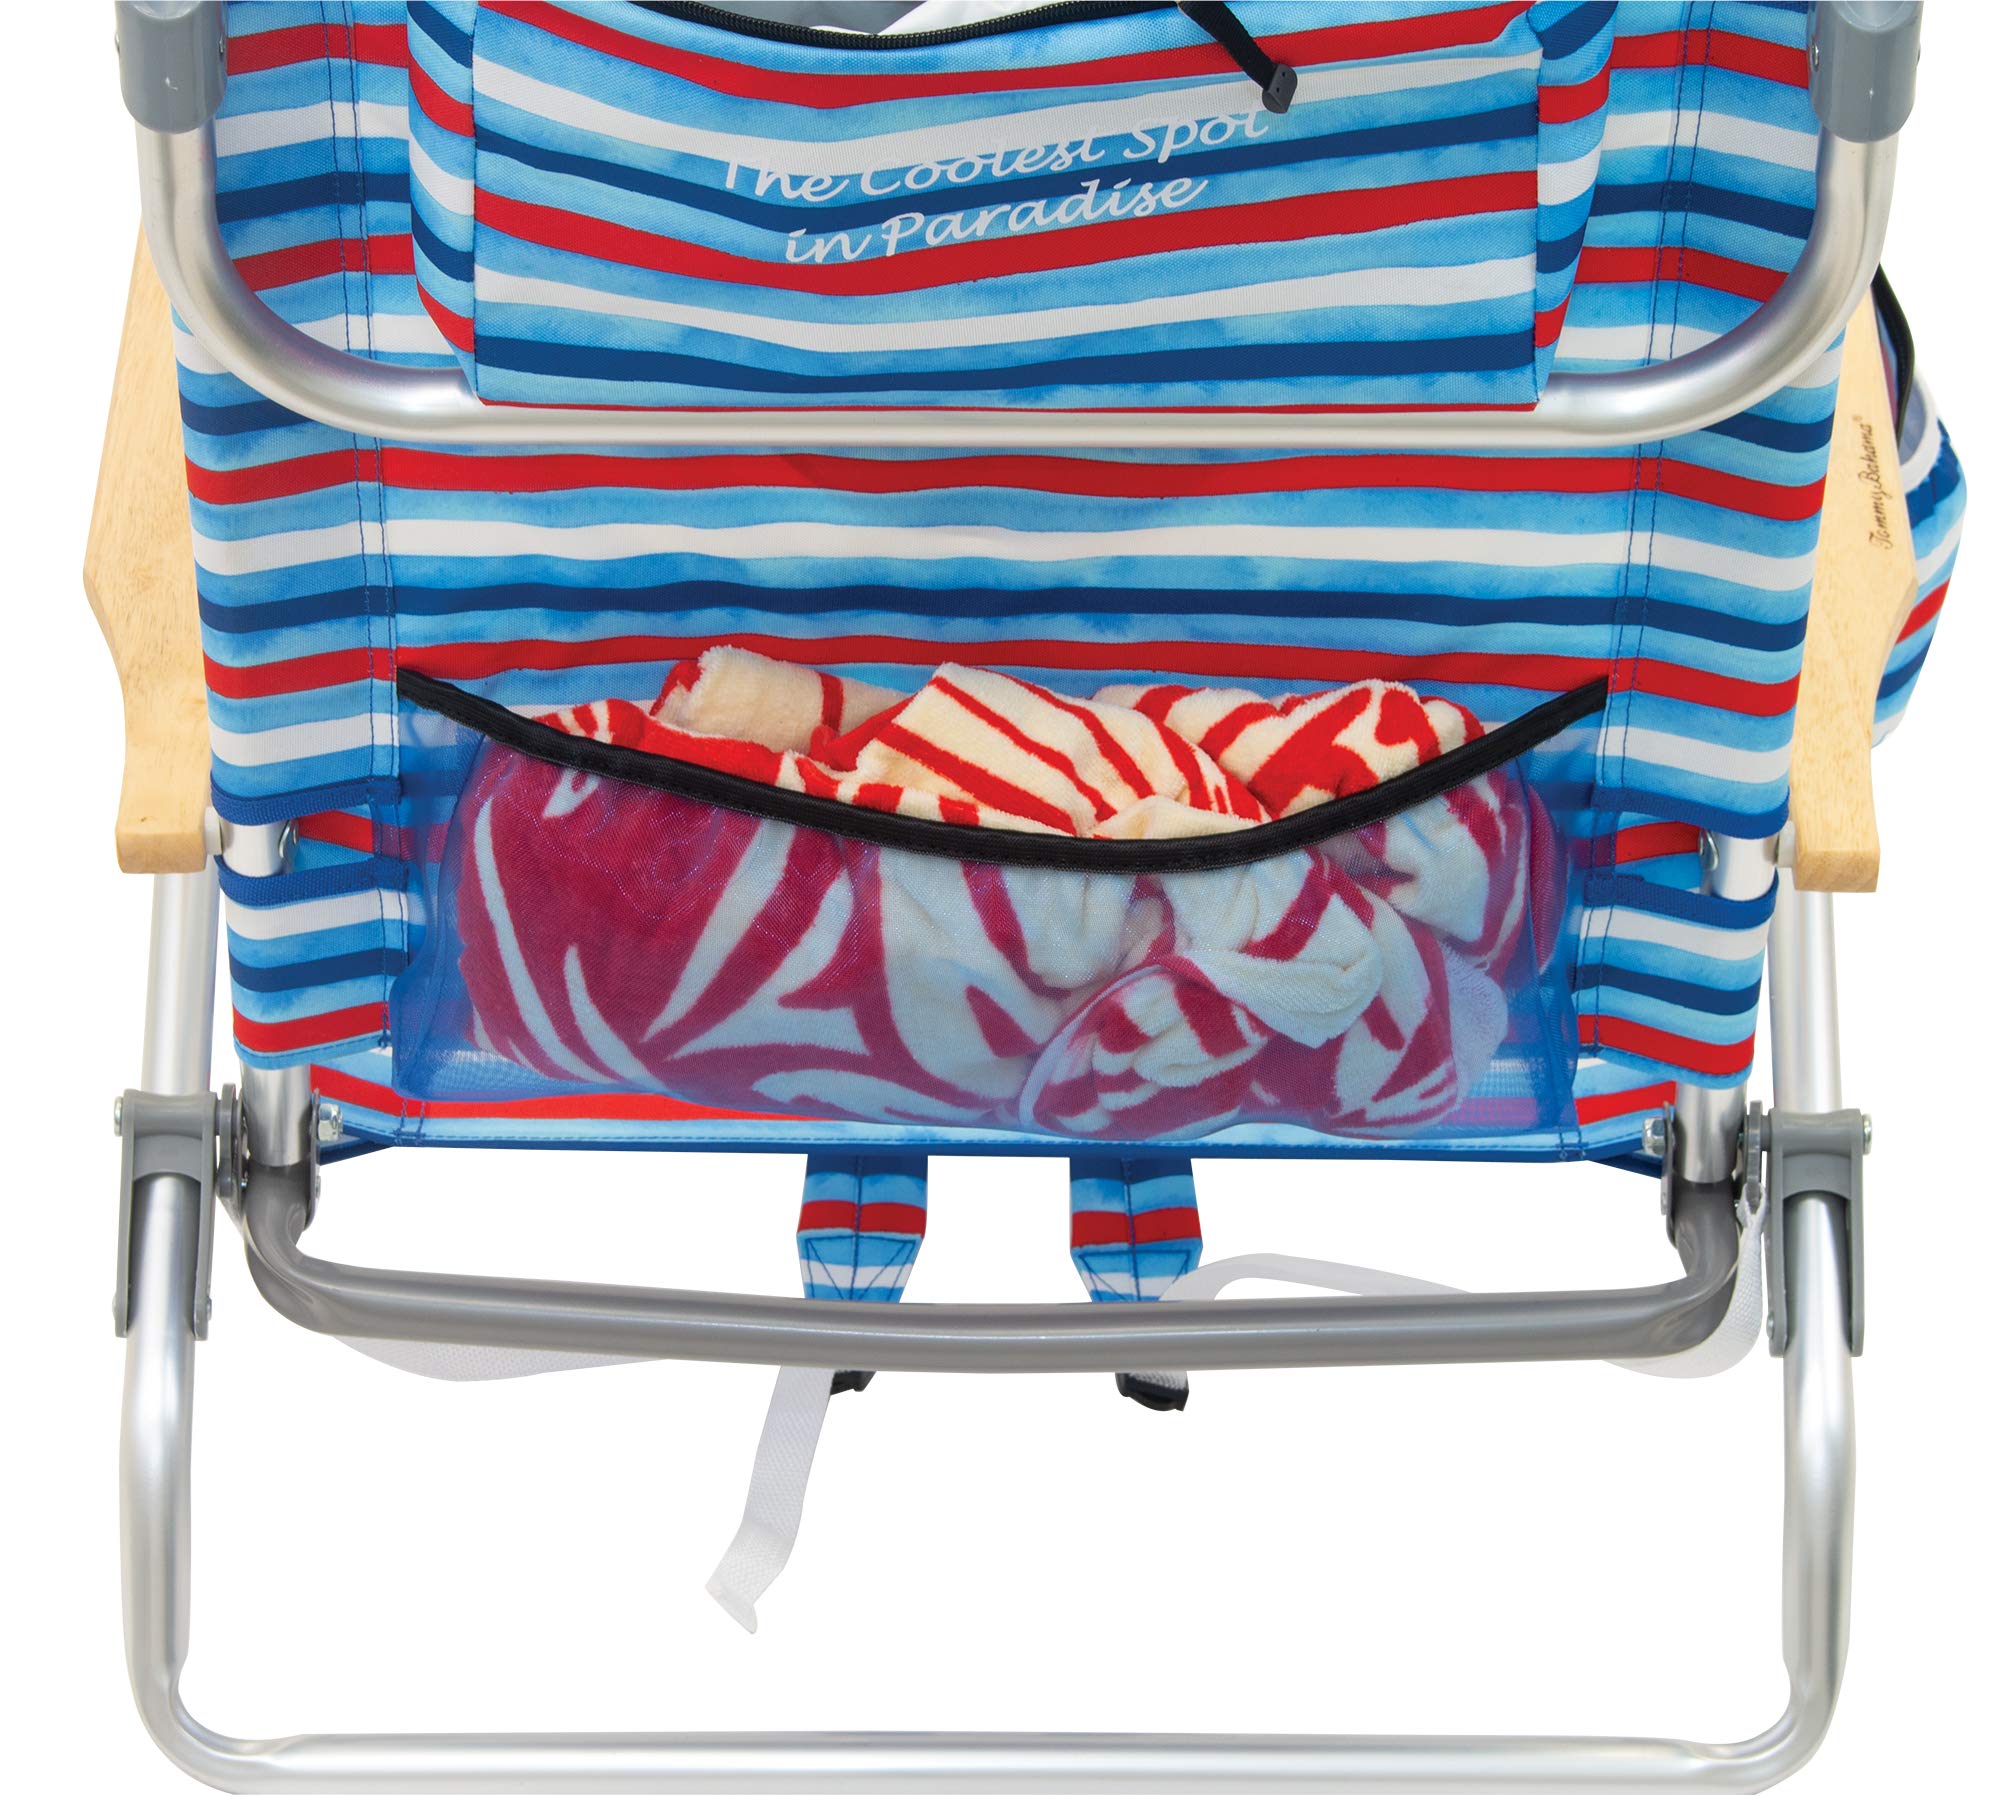 Tommy Bahama 5-Position Classic Lay Flat Folding Backpack Beach Chair, Aluminum , Red, White, and Blue Stripe